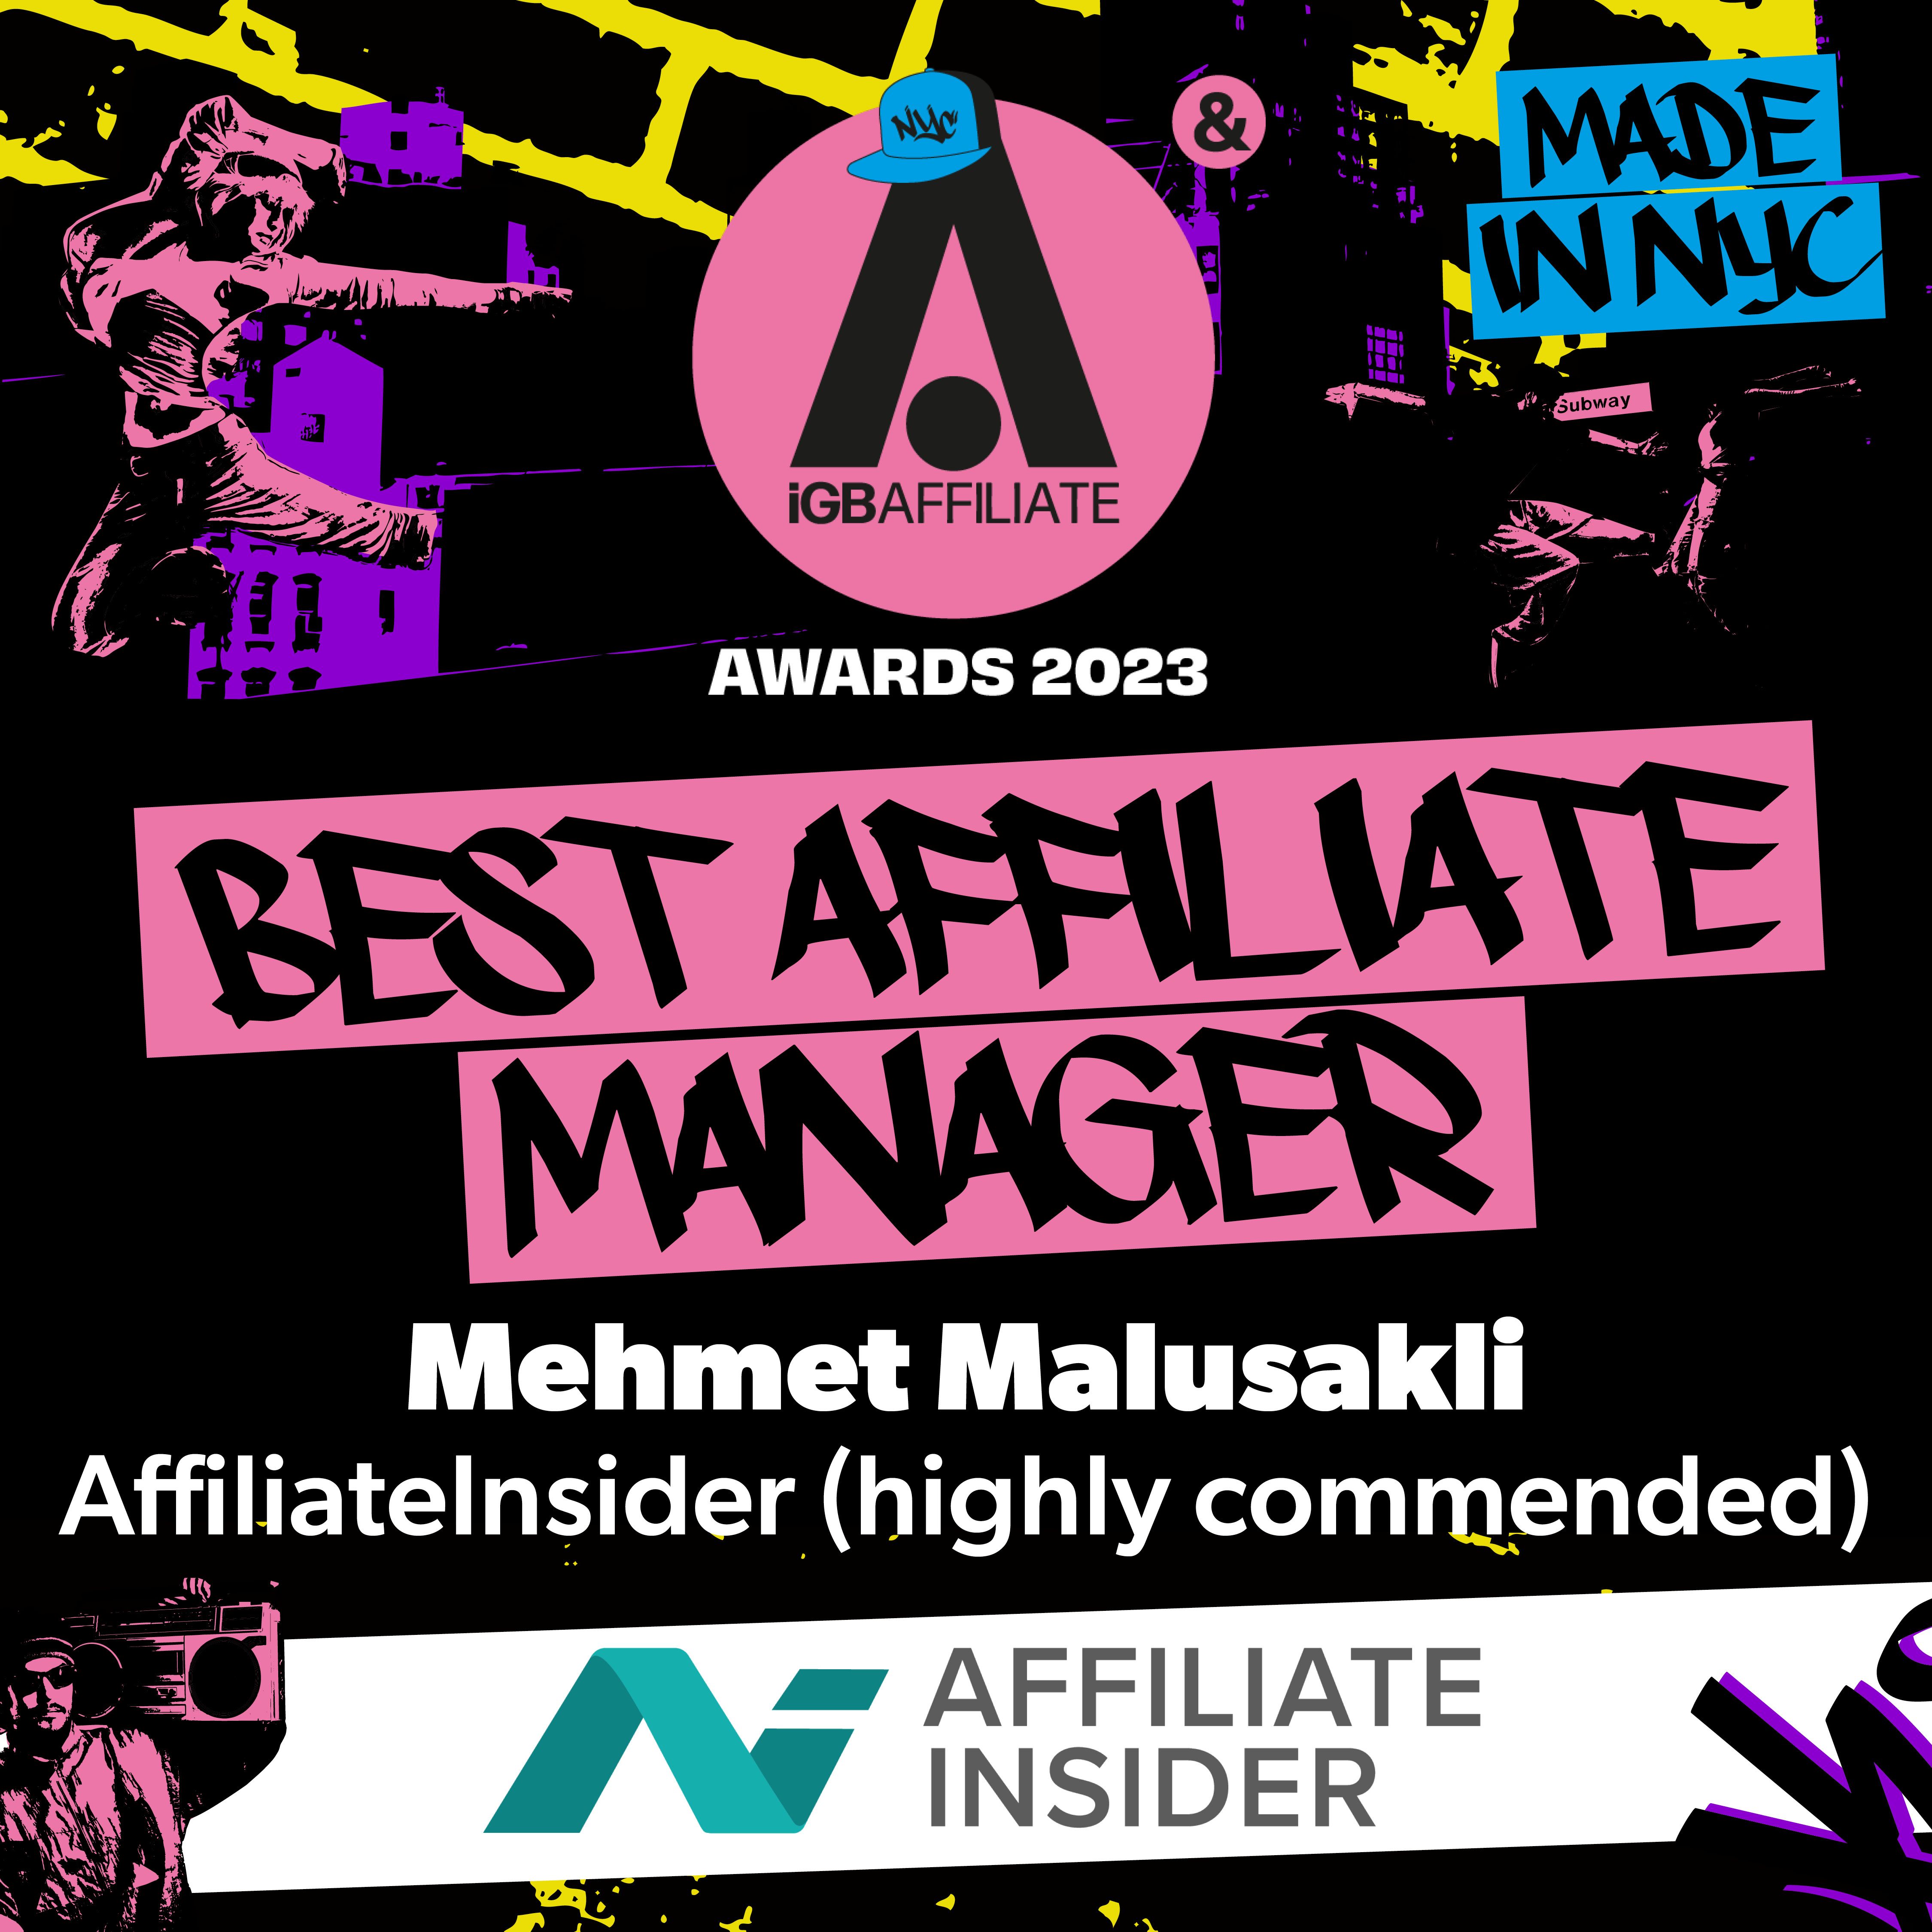 Best Aff Manager commended